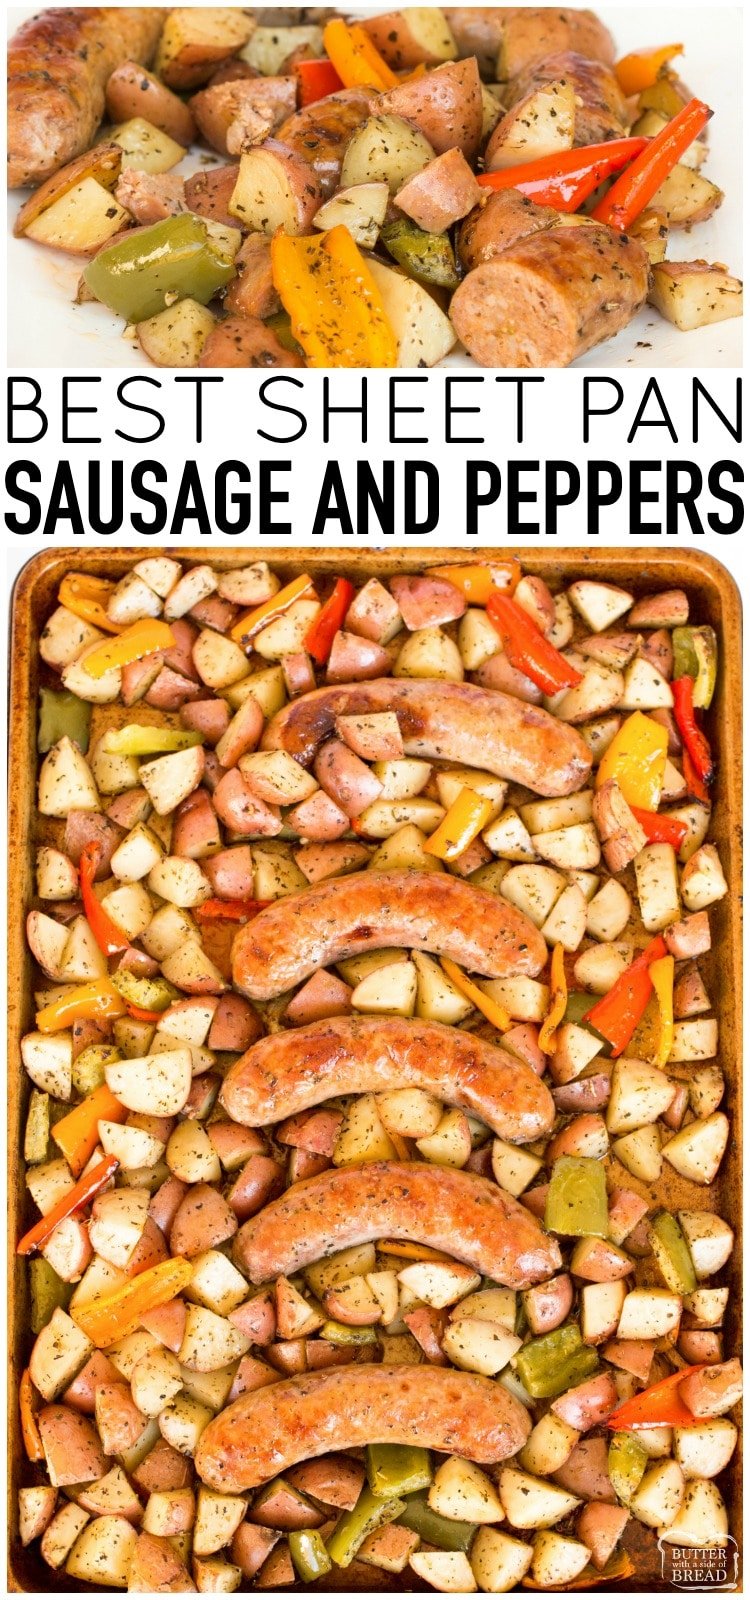 Sausage and Peppers recipe is a delicious, hearty, easy to make sheet pan dinner. With just a few ingredients Baked Italian Sausage & Peppers is quick and simple. #sausage #peppers #potatoes #easydinner #veggies #recipefrom Butter With a Side of Bread